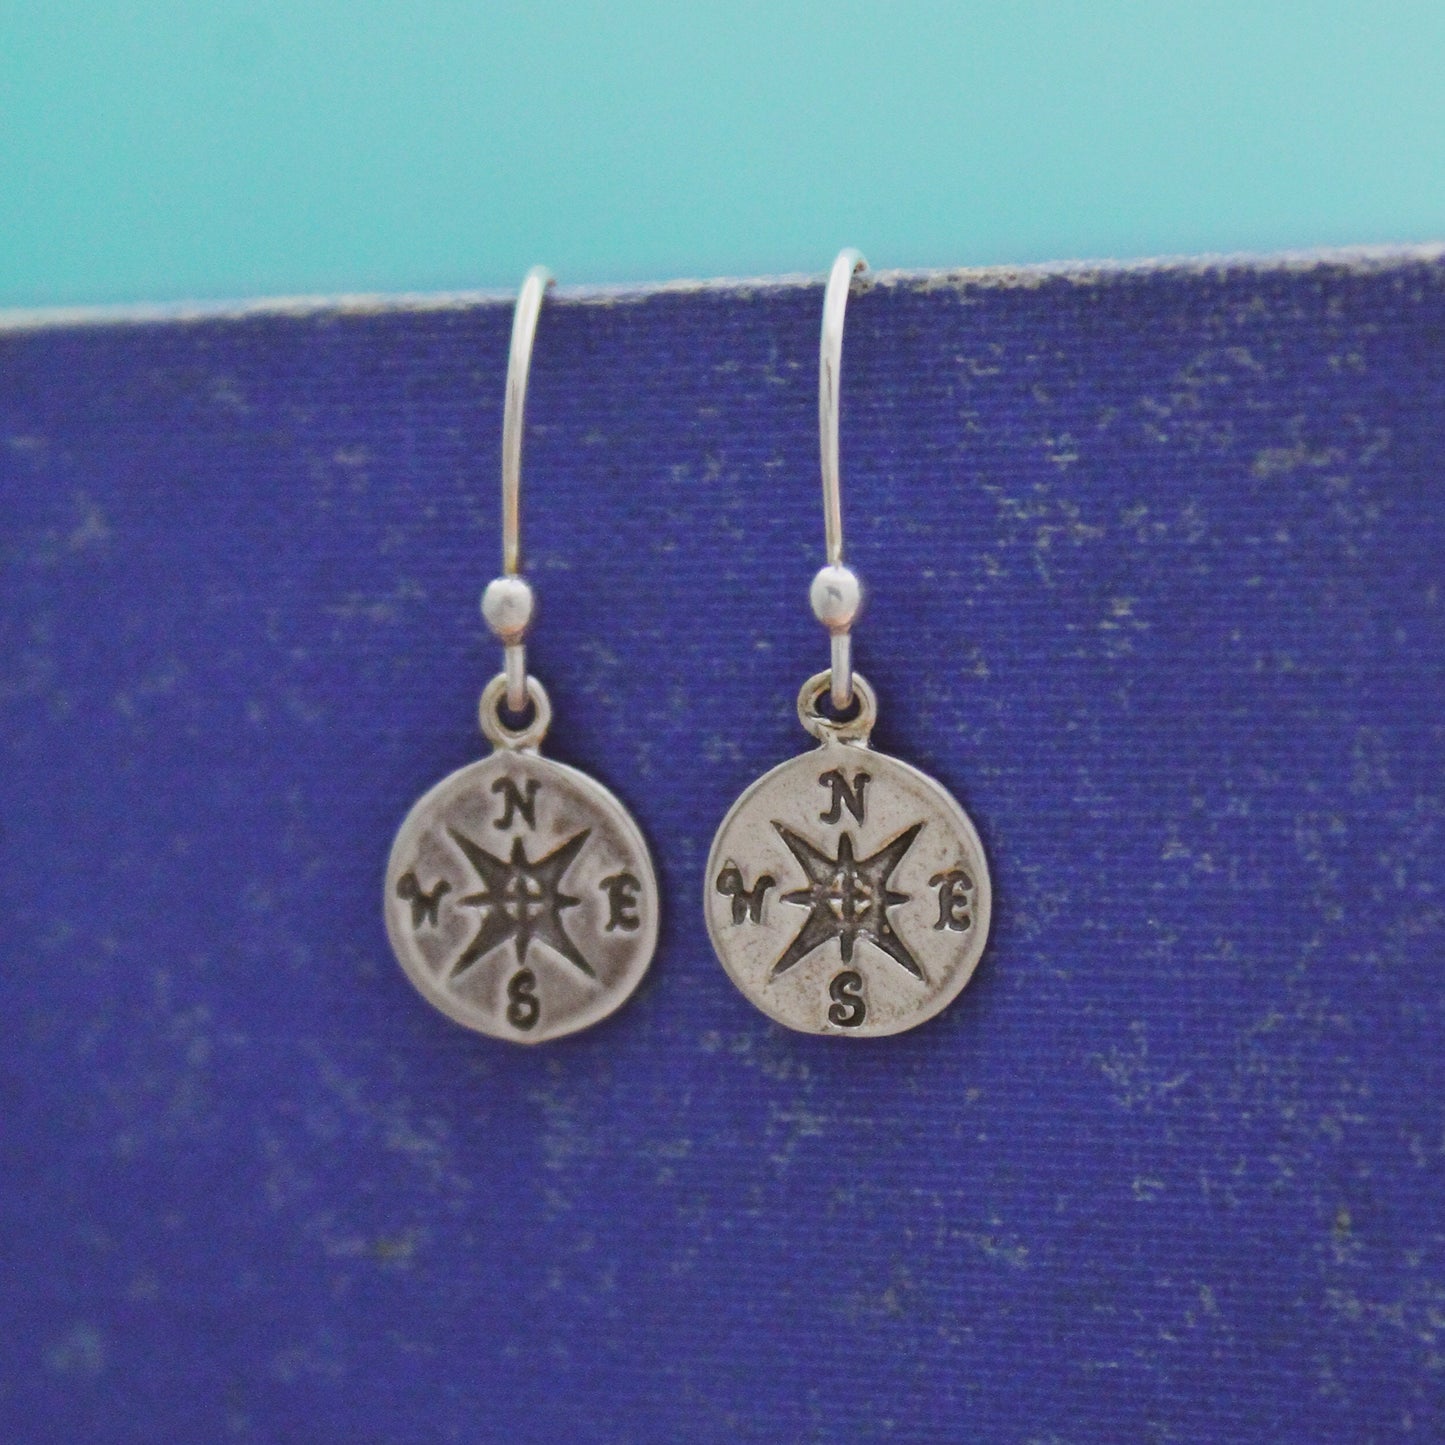 Cute Compass Earrings, Sterling Silver Compass Rose Earrings, Graduation Gift, Compass Jewelry, Grad Gifts for Her, Dainty Silver Earrings